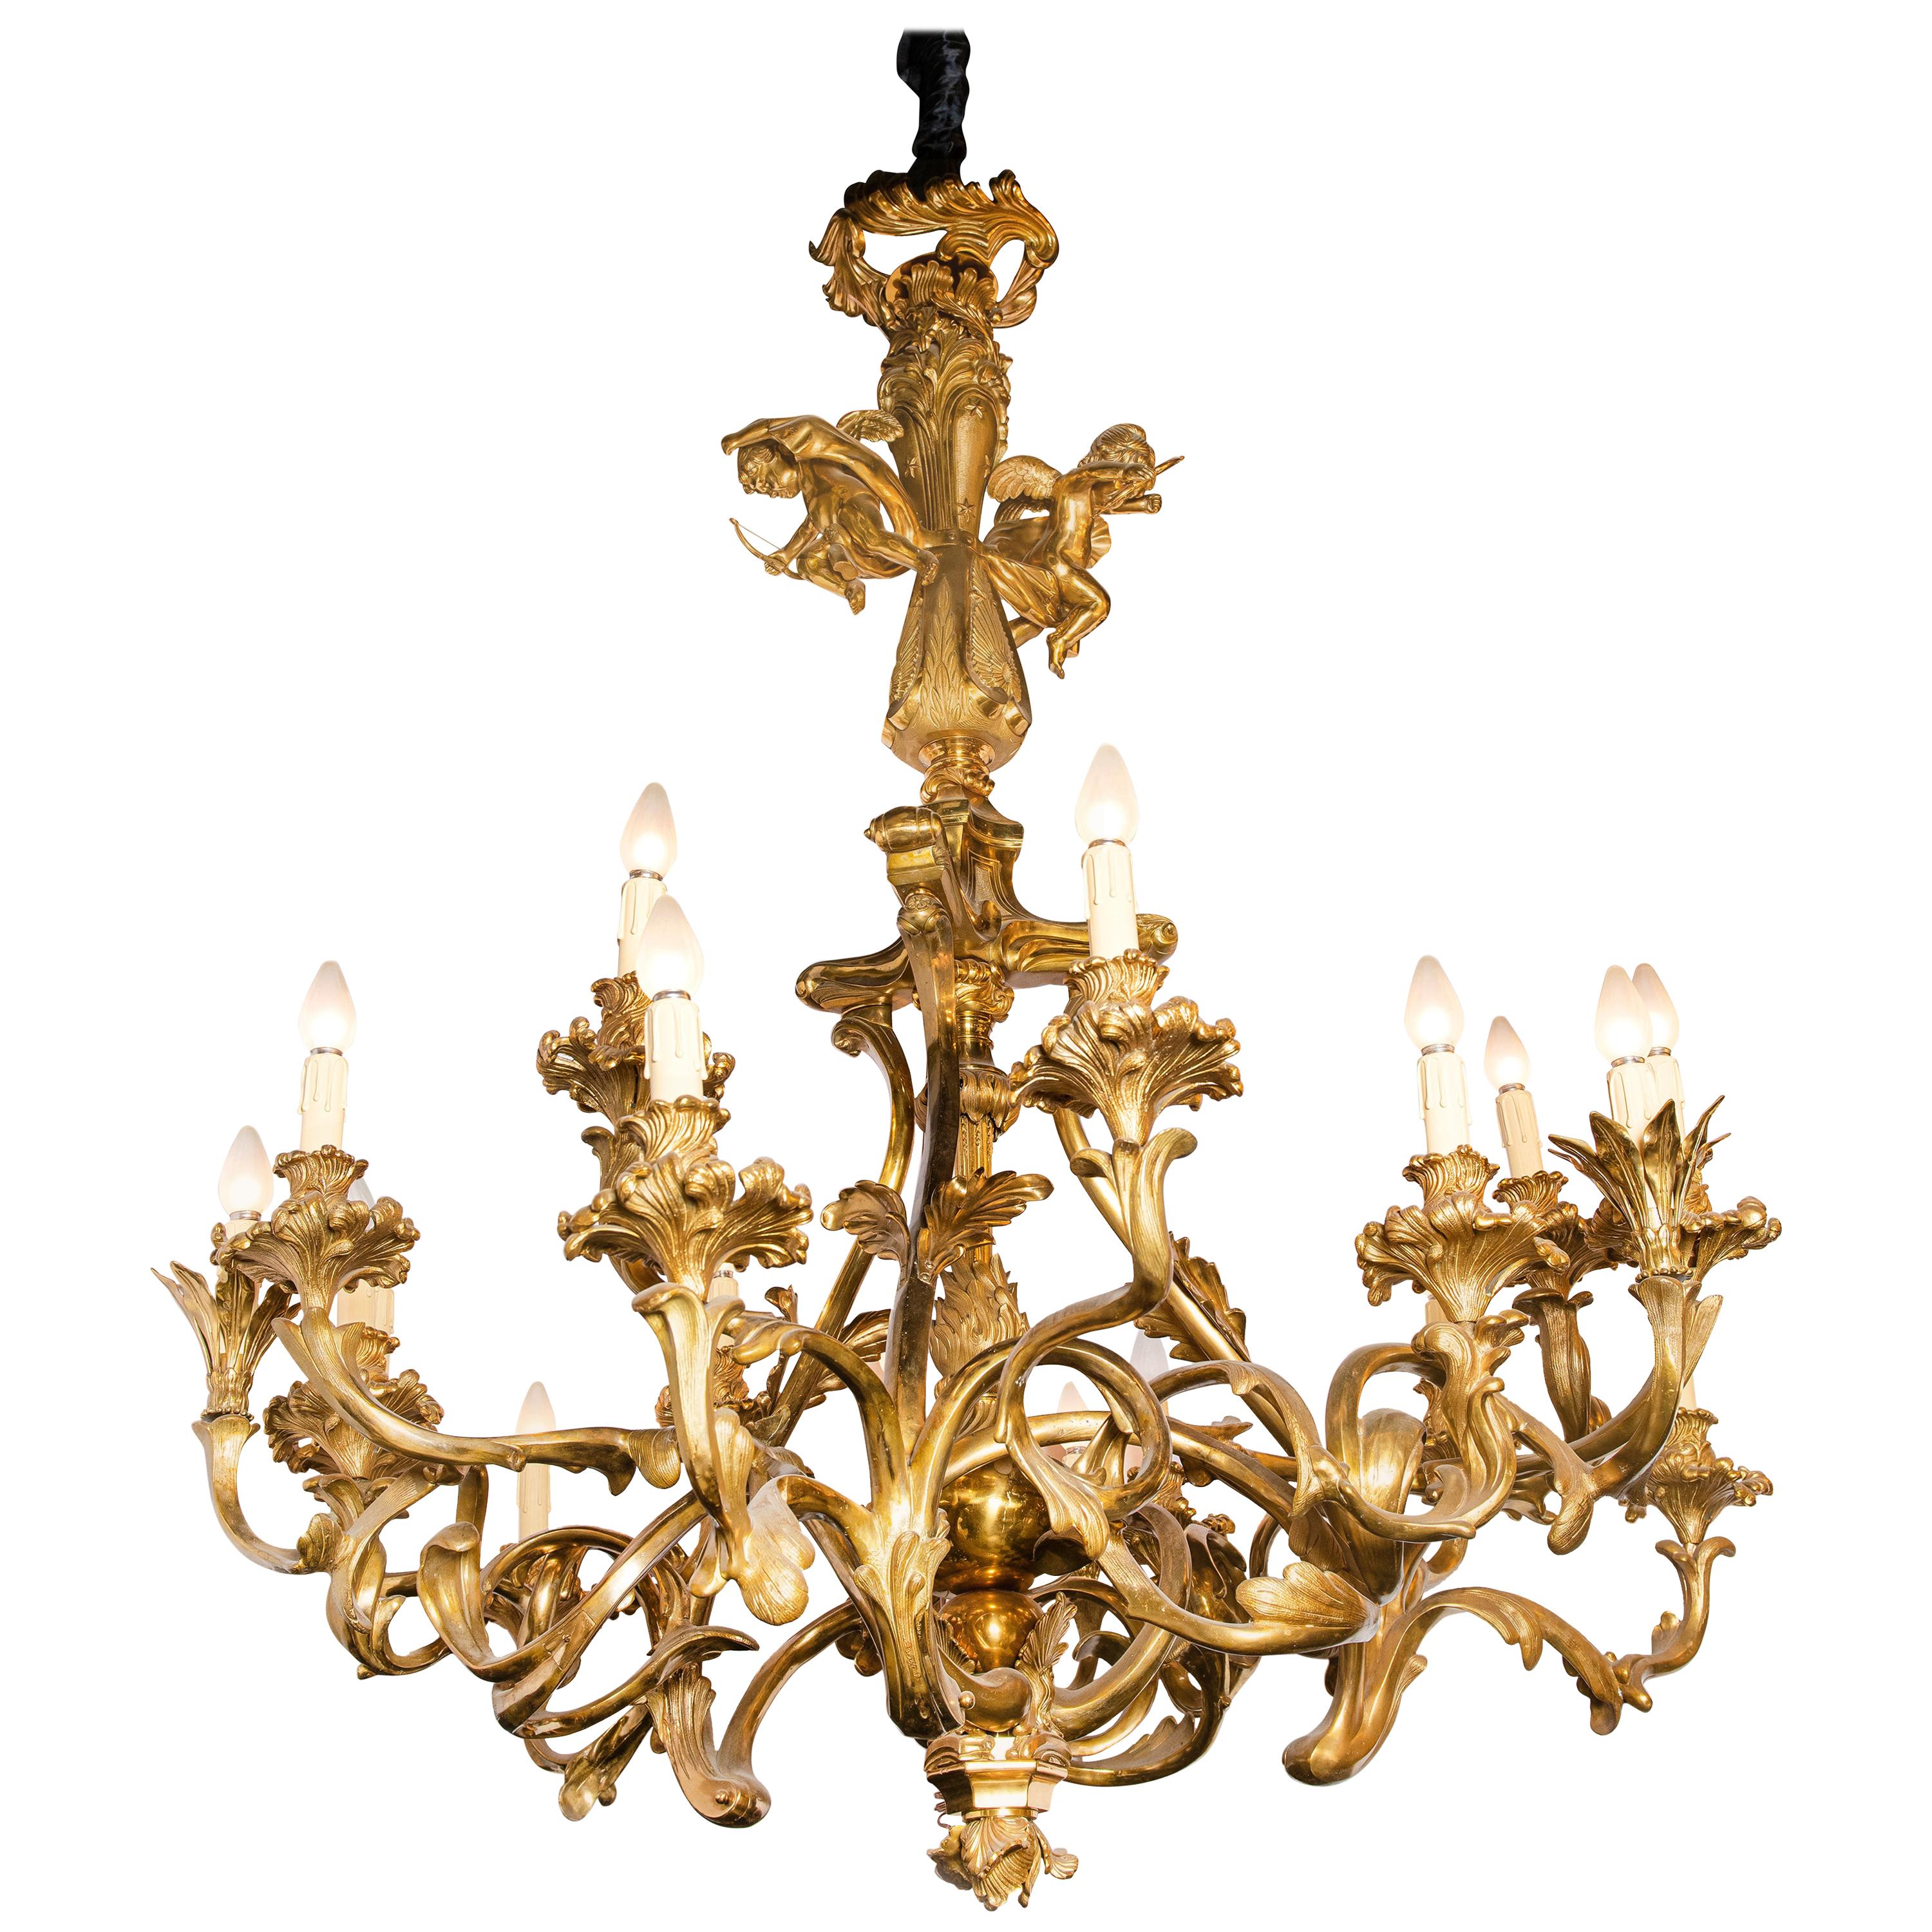 Gilt Bronze Chandelier with Lost-Wax Process, France, circa 1890